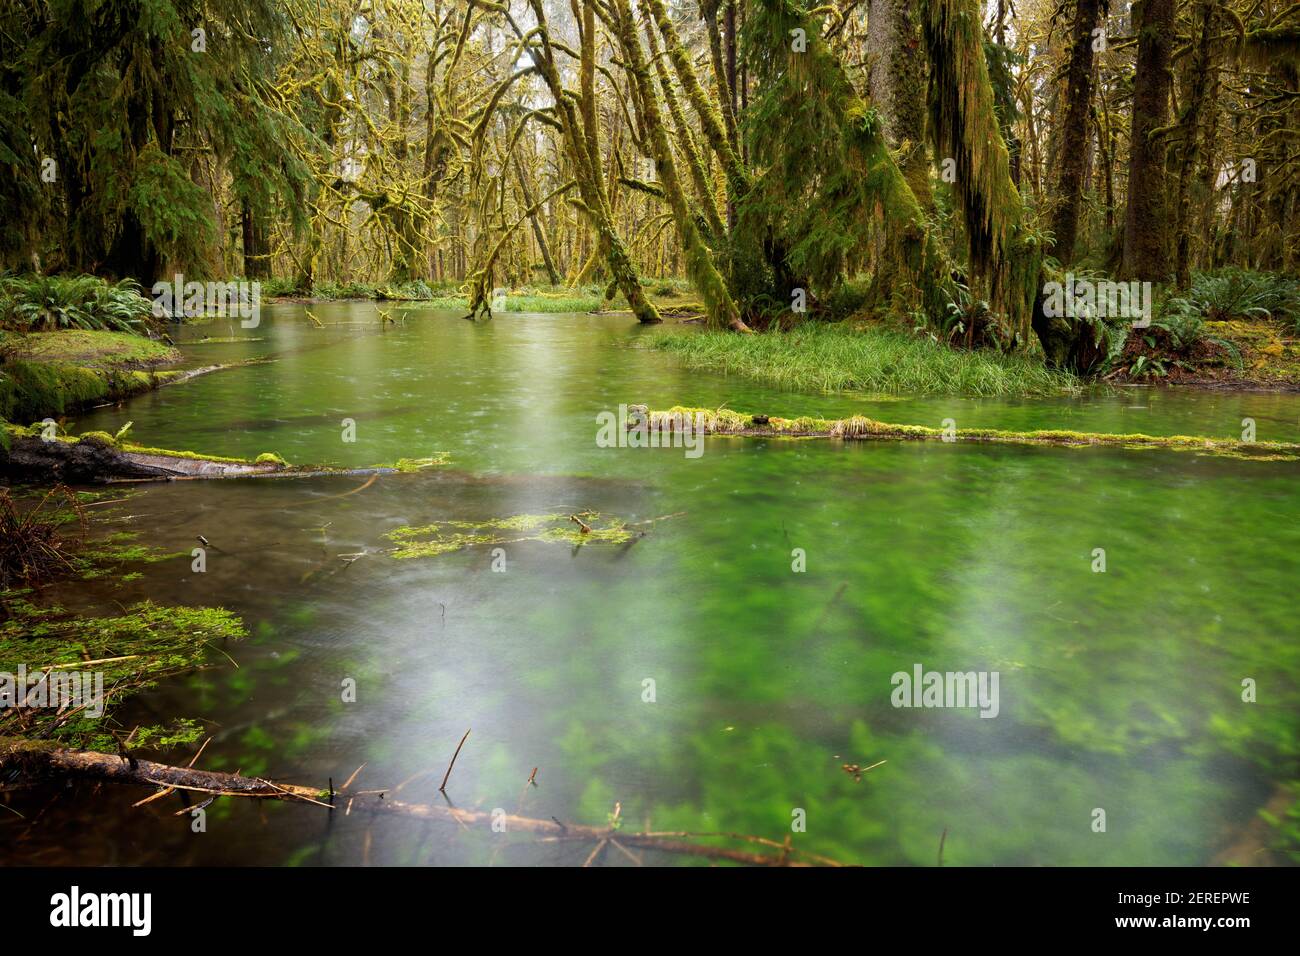 Wetland pond in temperate old-growth forest, Maple Glade Loop Trail, Quinault Rainforest, Olympic National Park, Grays Harbor County, Washington, USA Stock Photo